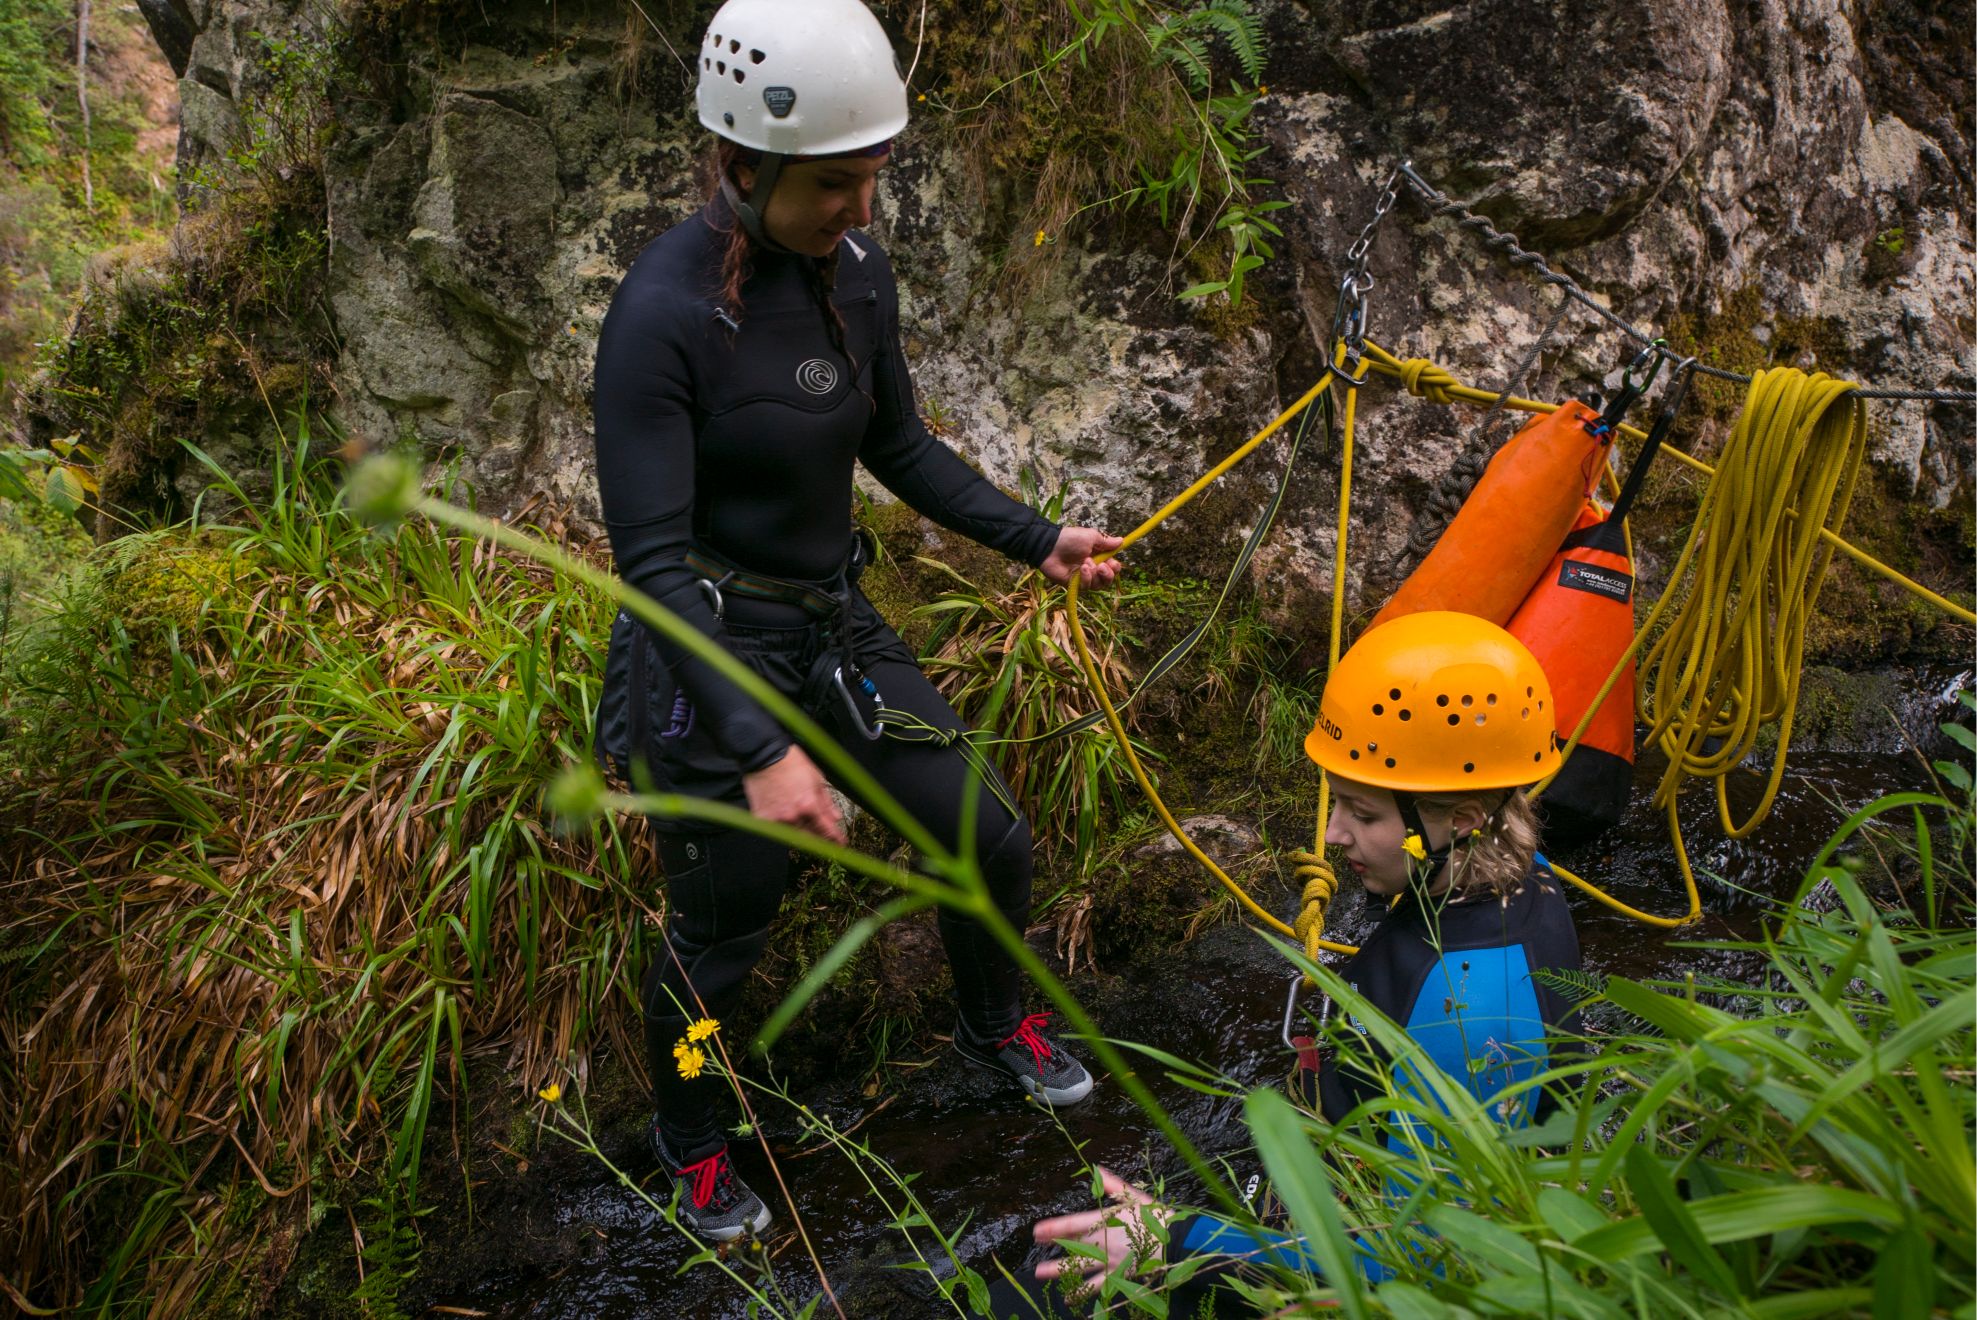 Due persone che fanno canyoning in cordata.